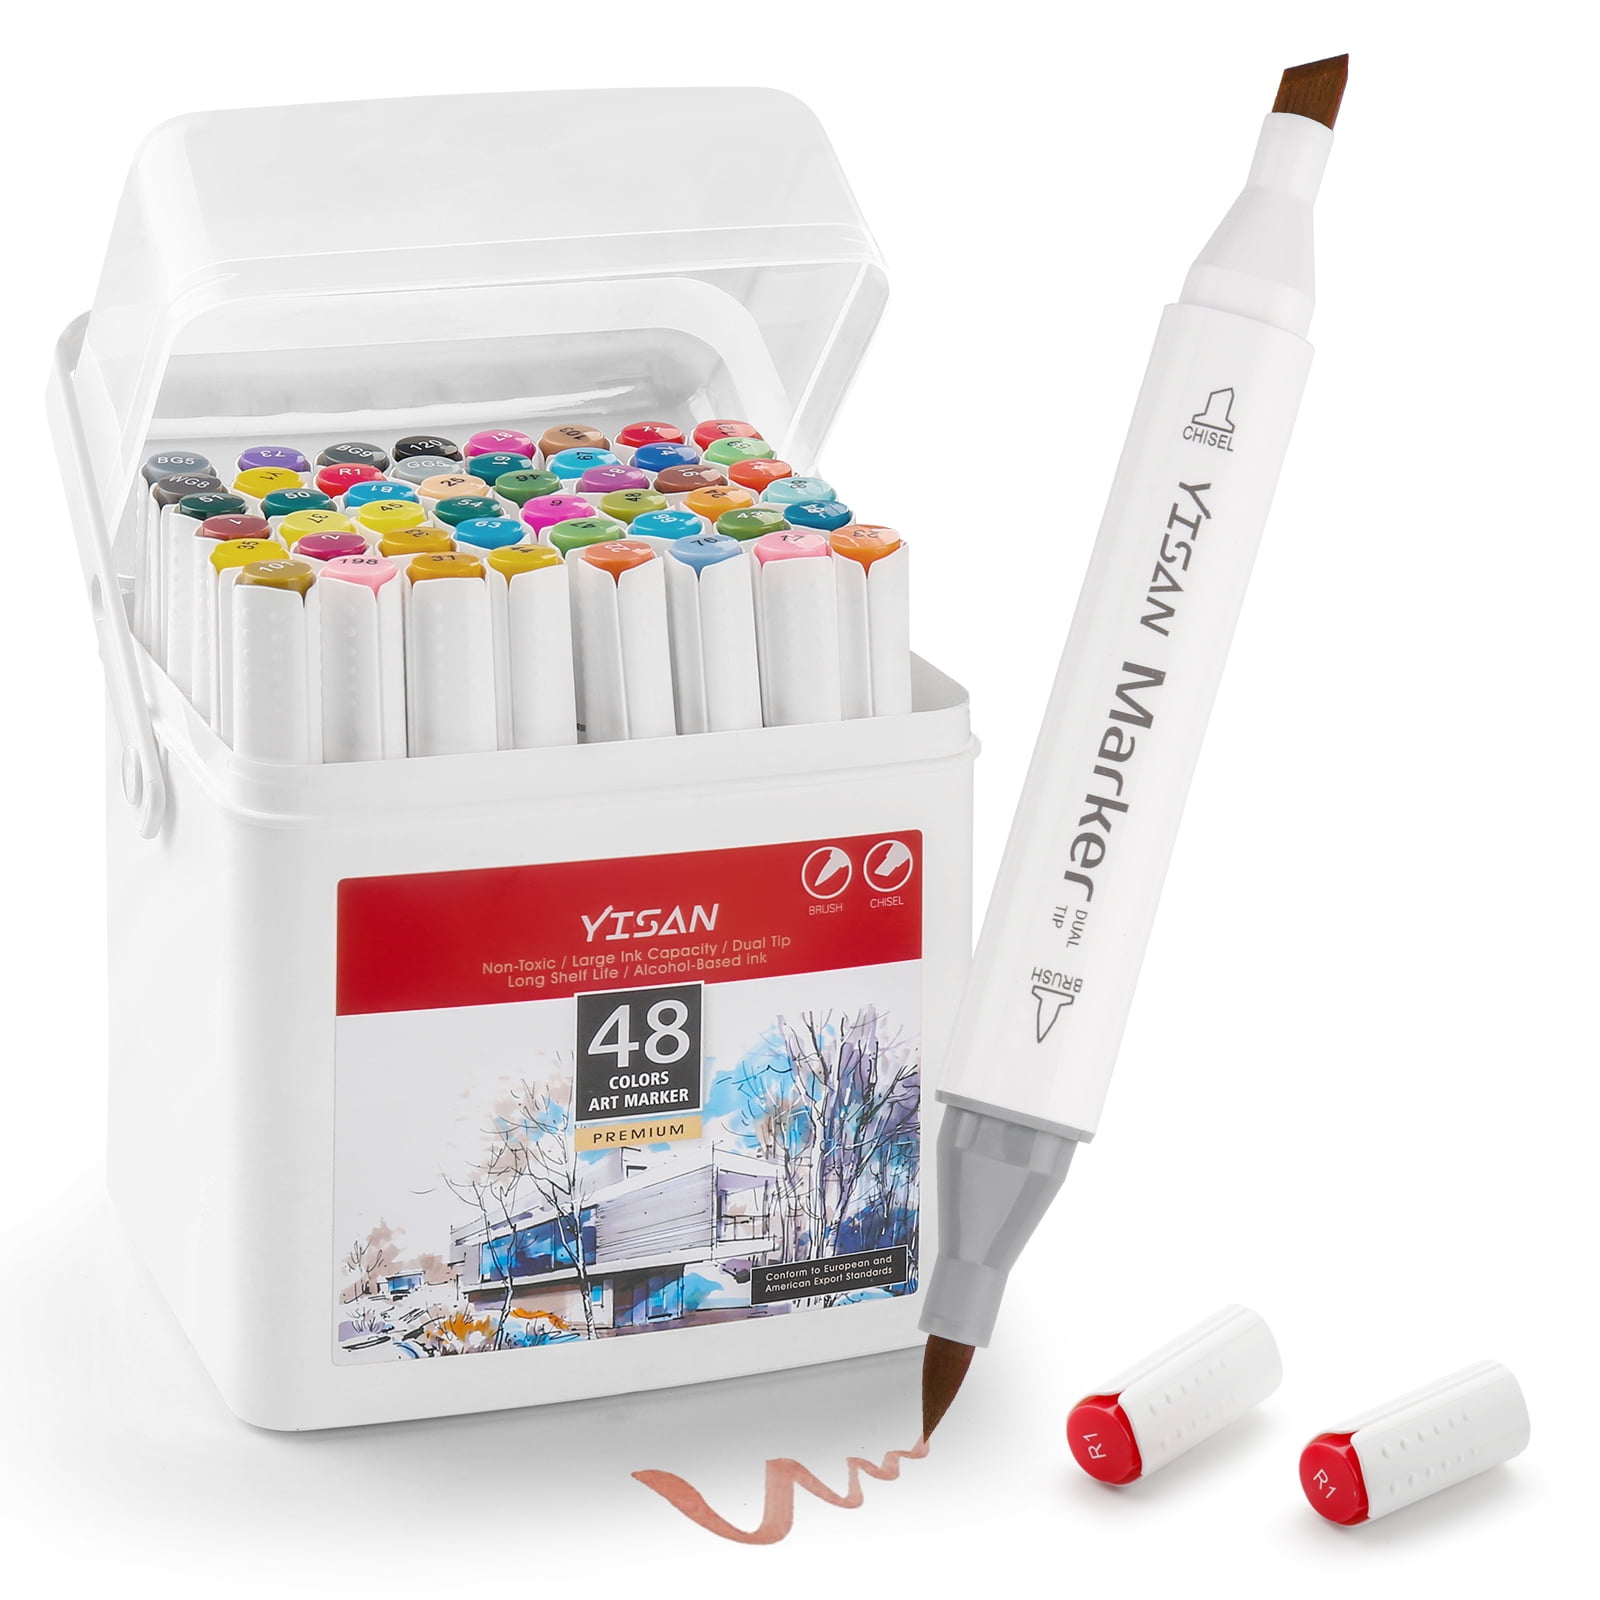 Caliart 51 Colors Alcohol Brush Markers (Brush & Chisel) + 32 Colors Gel  Pen Set Sketch Markers Pens for Kids, Artist Art Markers, Adult Coloring  and